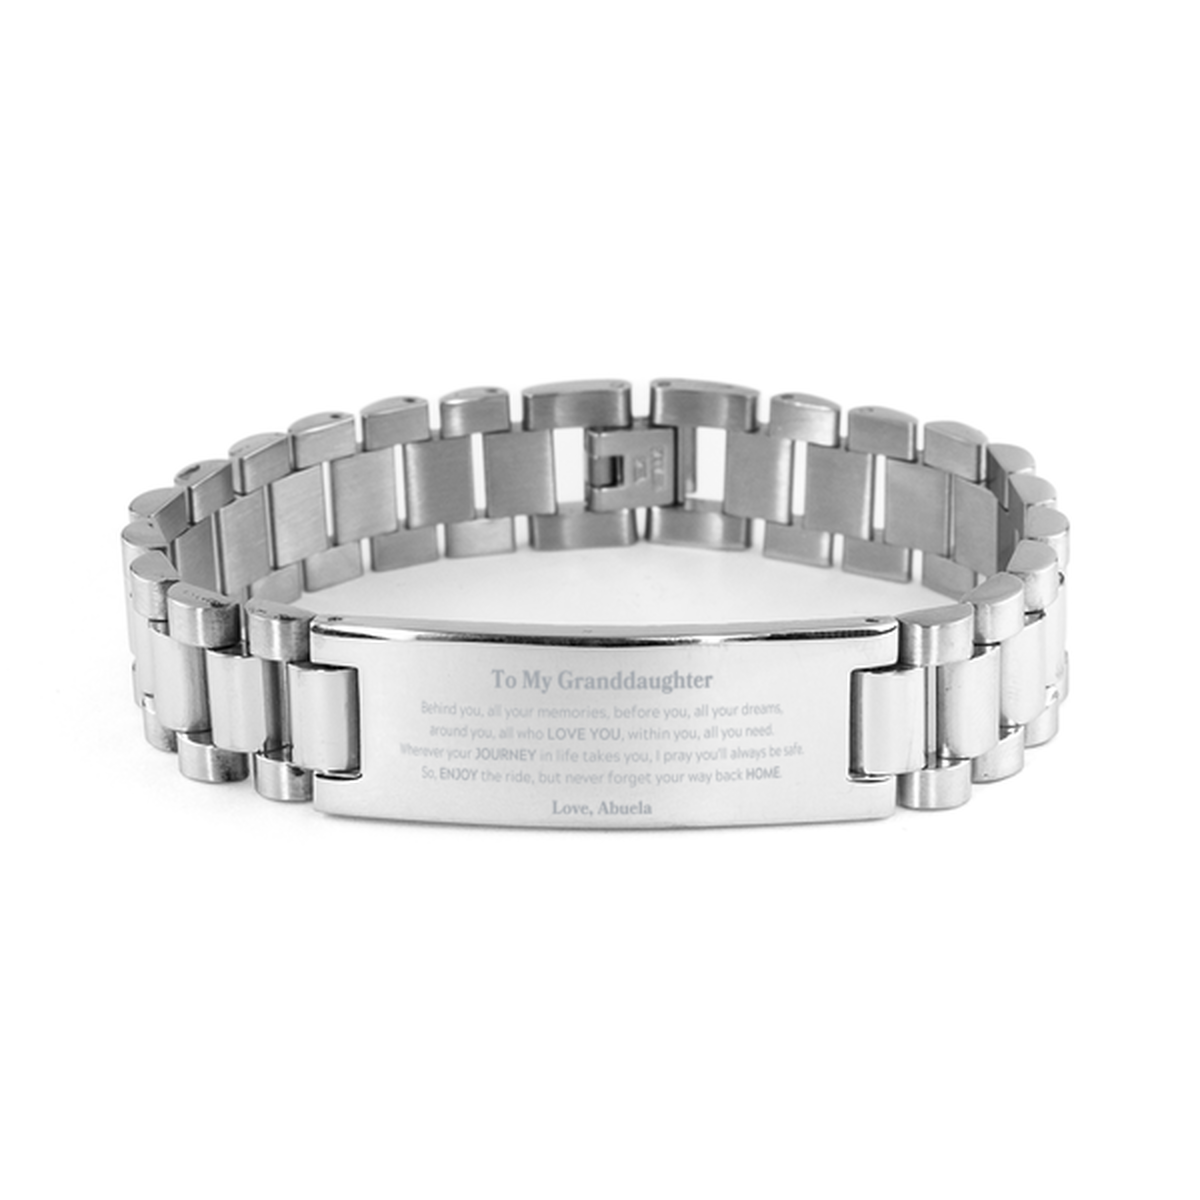 To My Granddaughter Graduation Gifts from Abuela, Granddaughter Ladder Stainless Steel Bracelet Christmas Birthday Gifts for Granddaughter Behind you, all your memories, before you, all your dreams. Love, Abuela